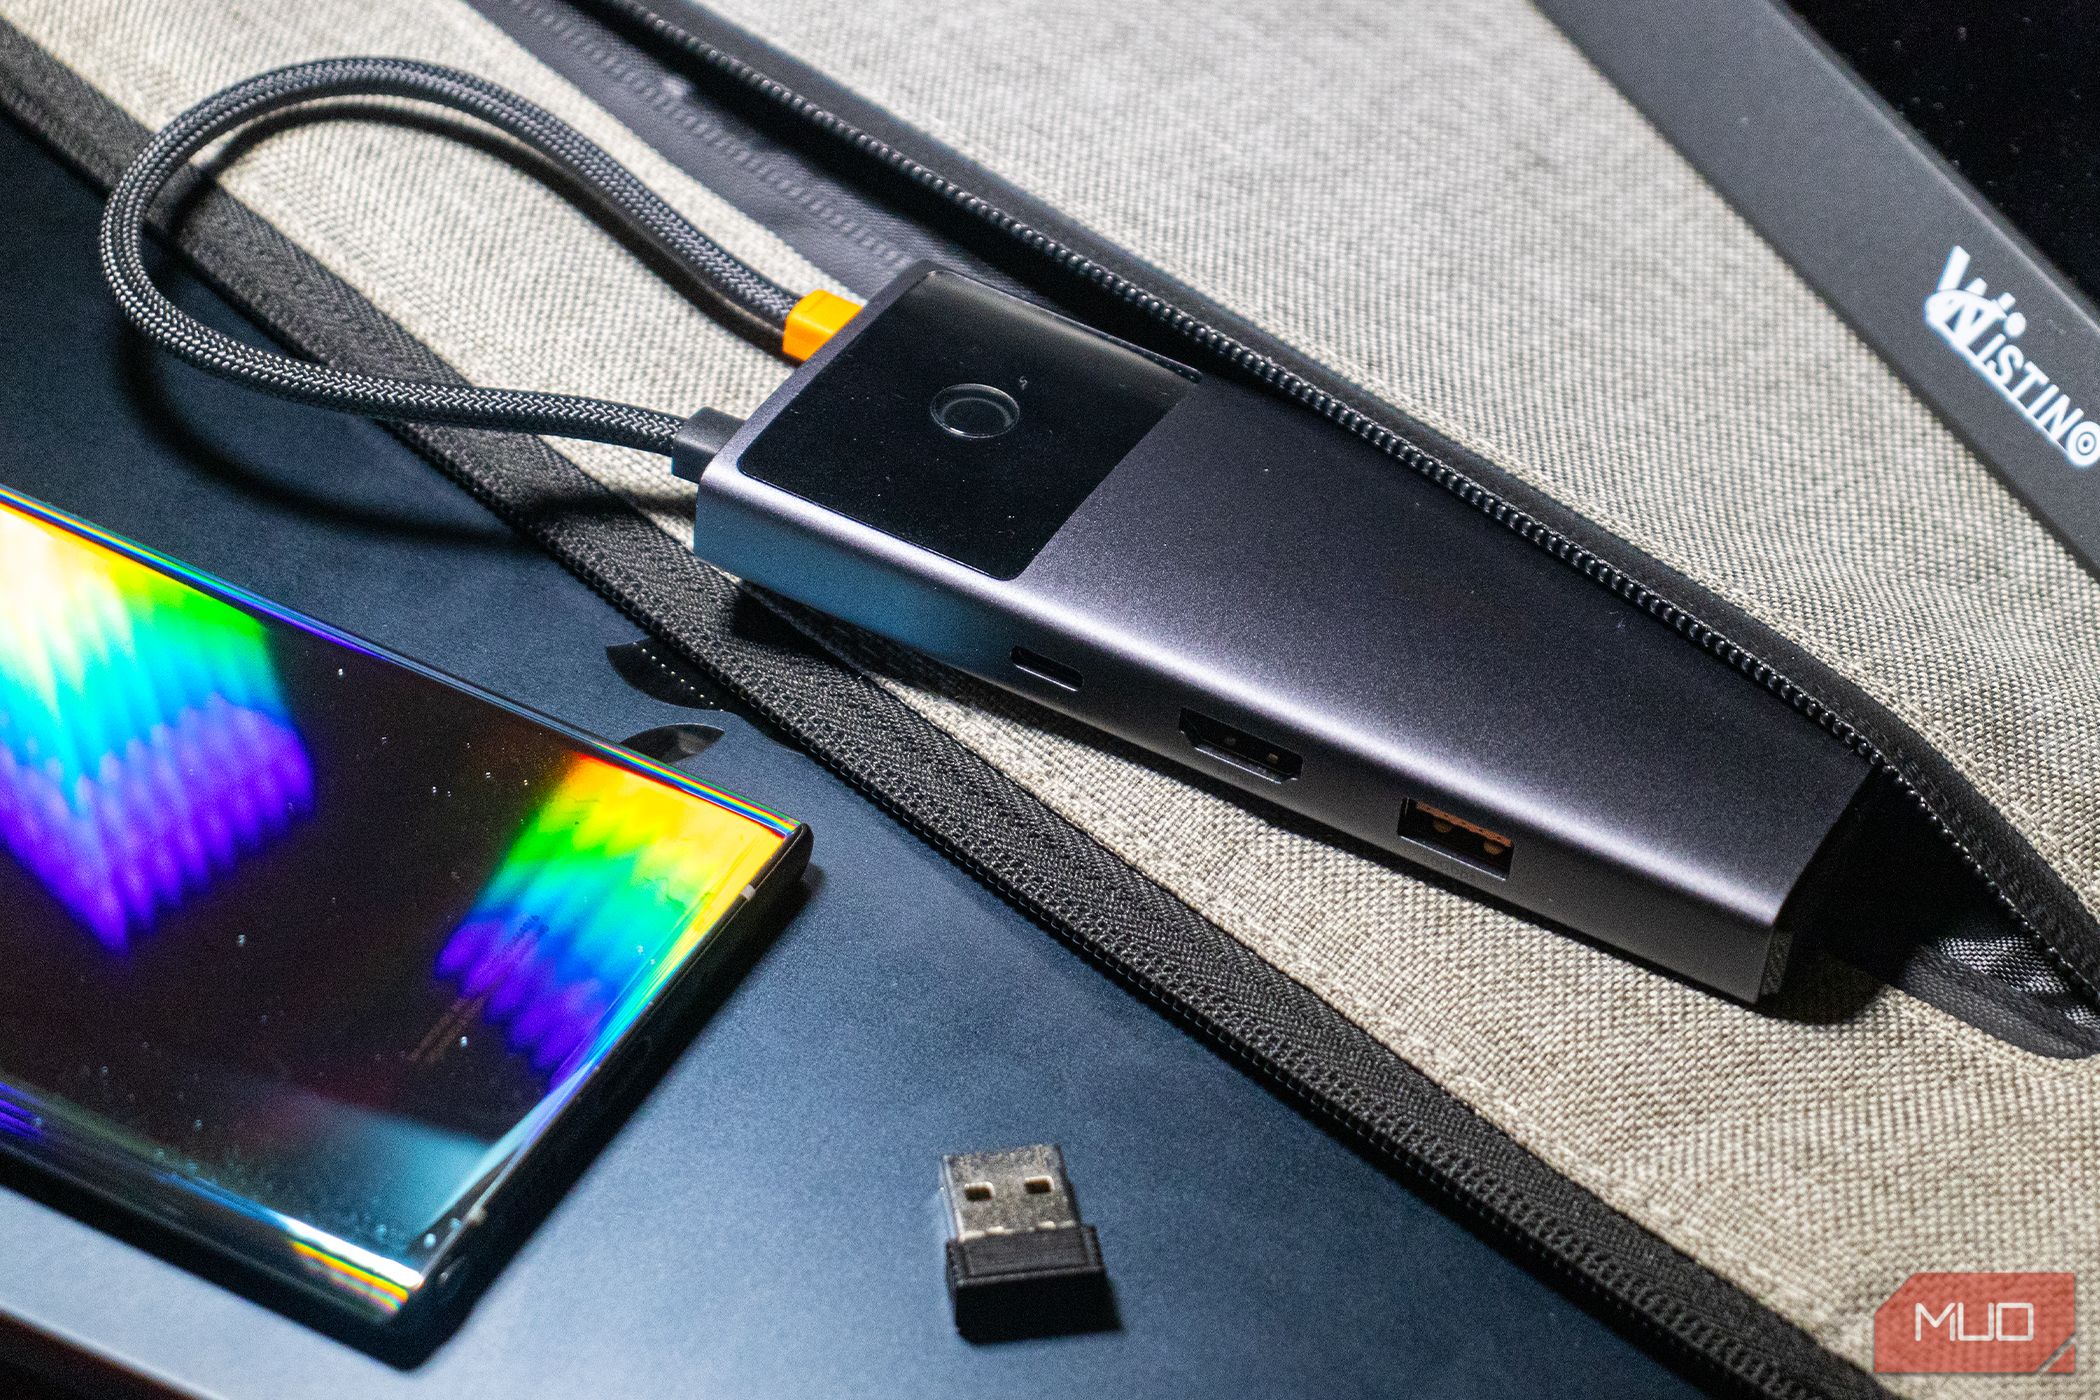 Baseus Metal Gleam Series II 6-in-1 USB Hub Review: A Dock in Your Pocket